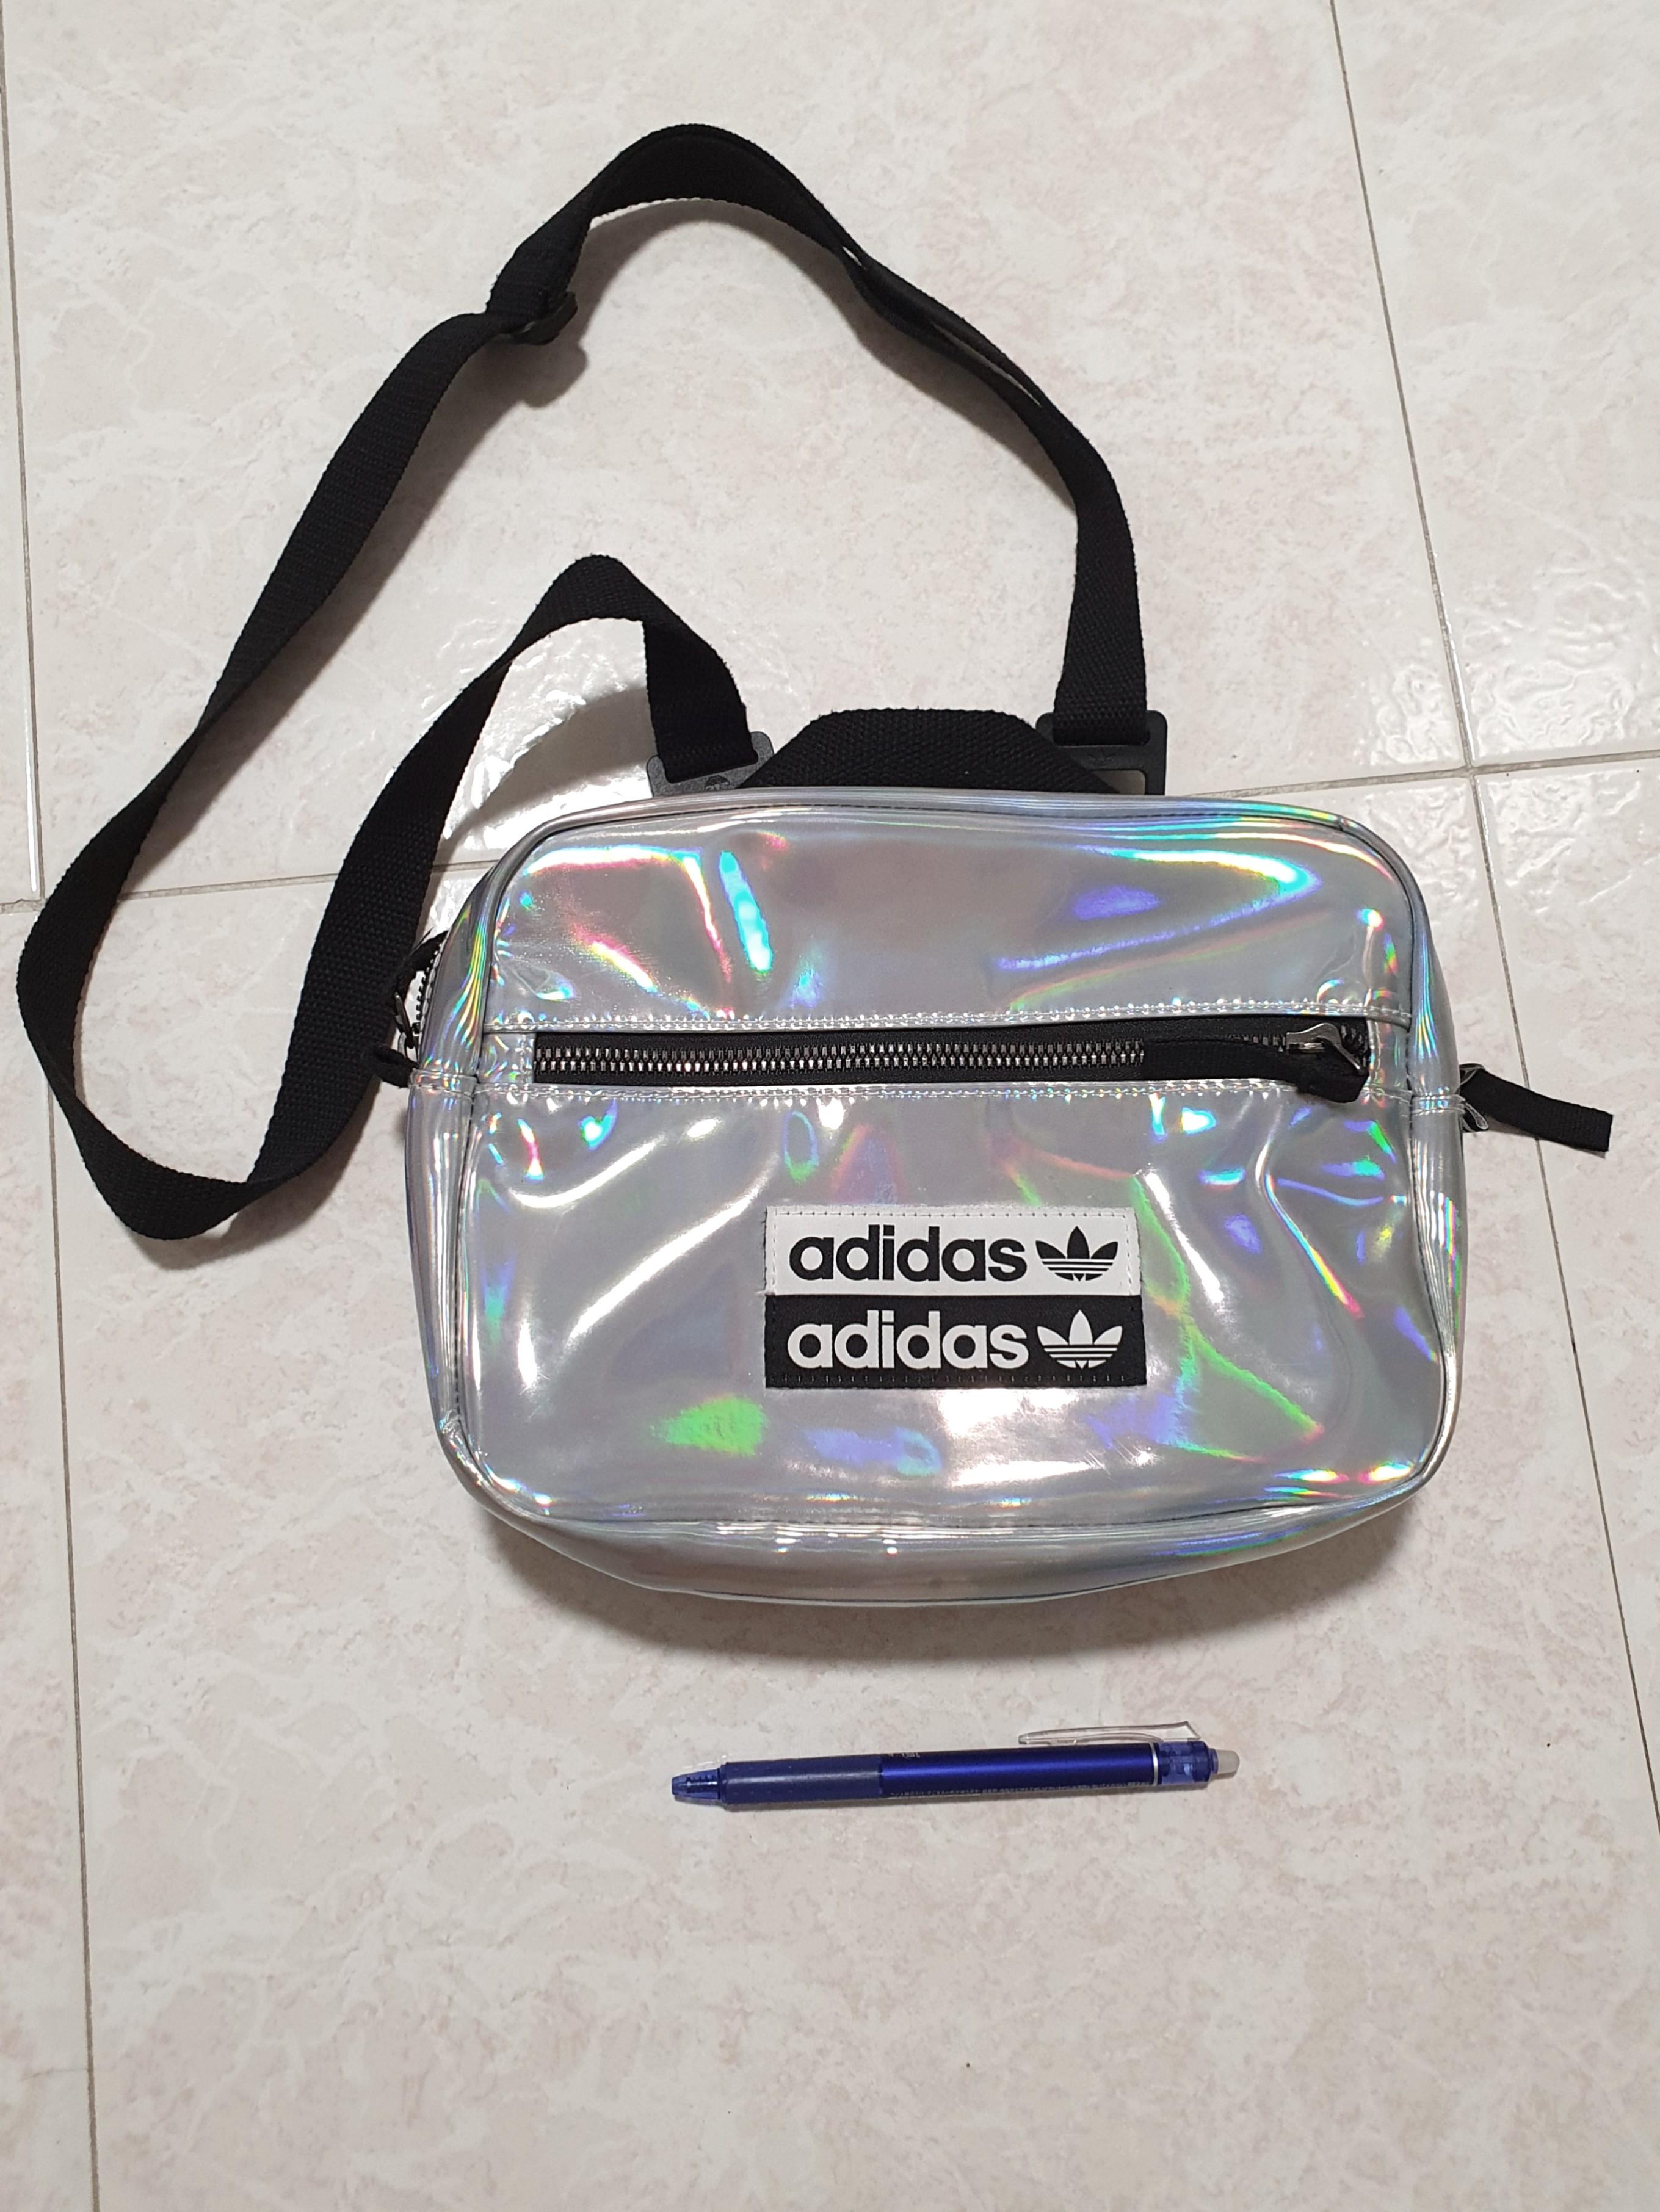 Adidas Originals Holographic Women's Bags & Wallets, Cross-body Bags Carousell